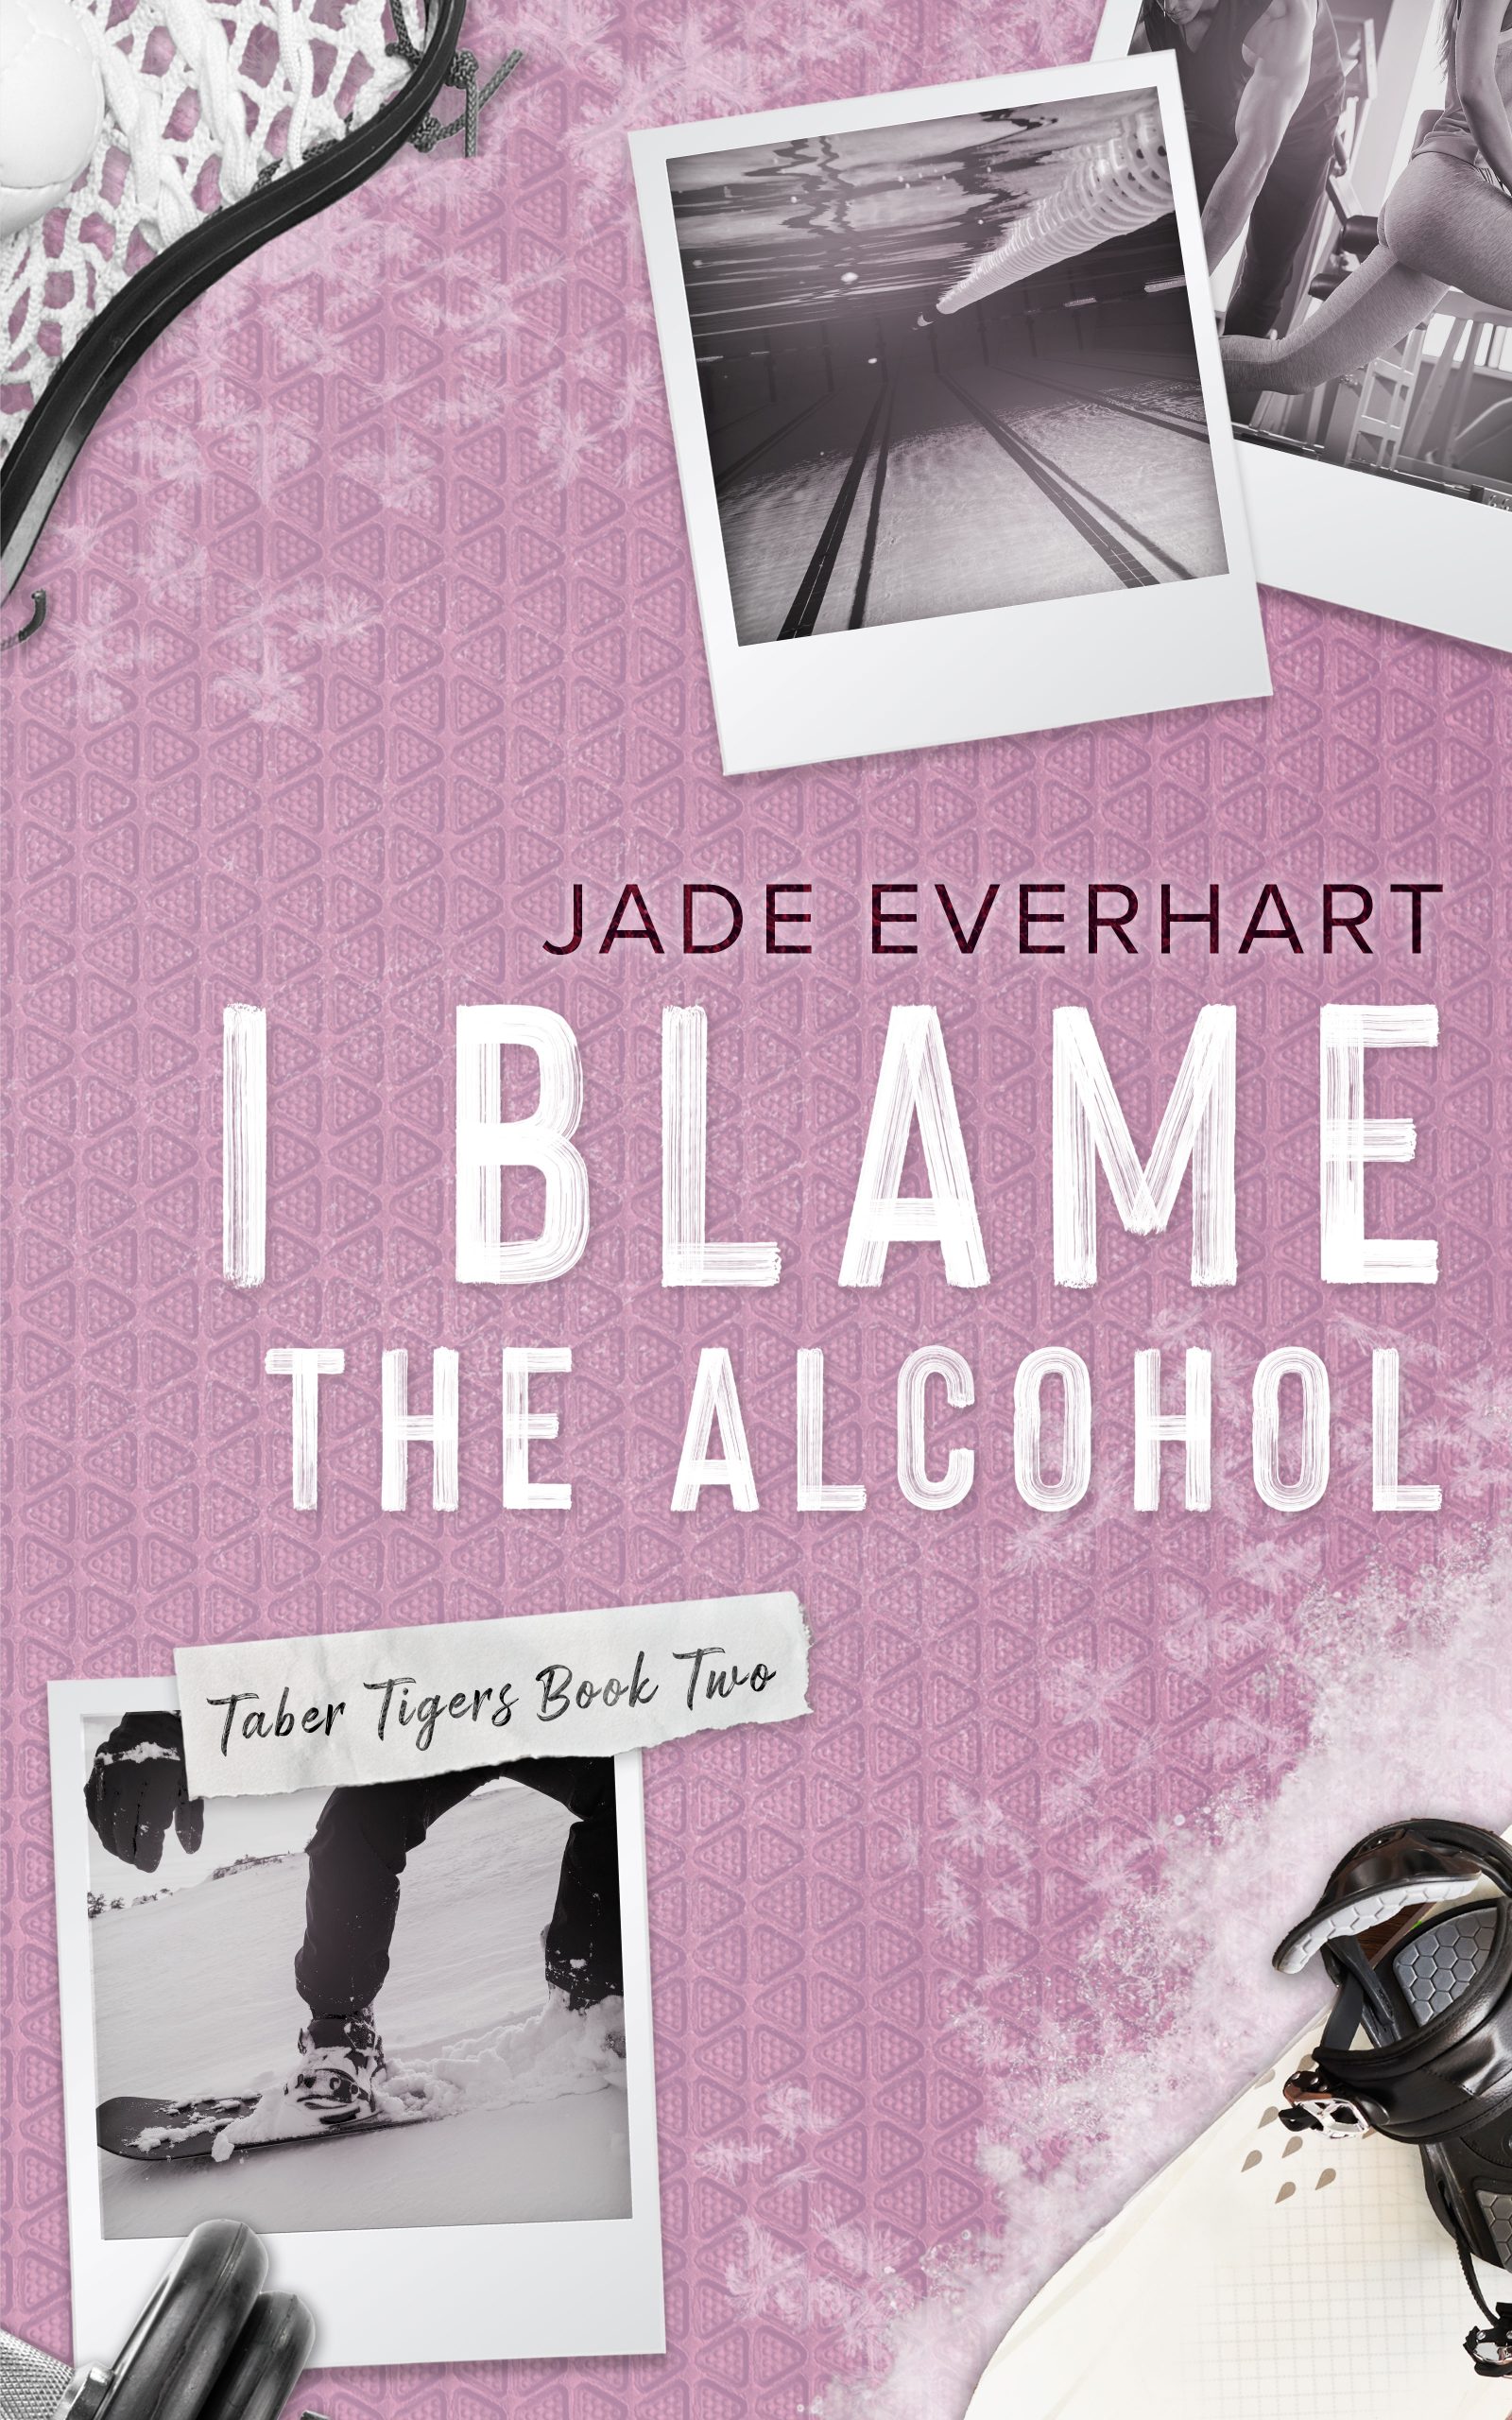 I Blame the Alcohol by Jade Everhart